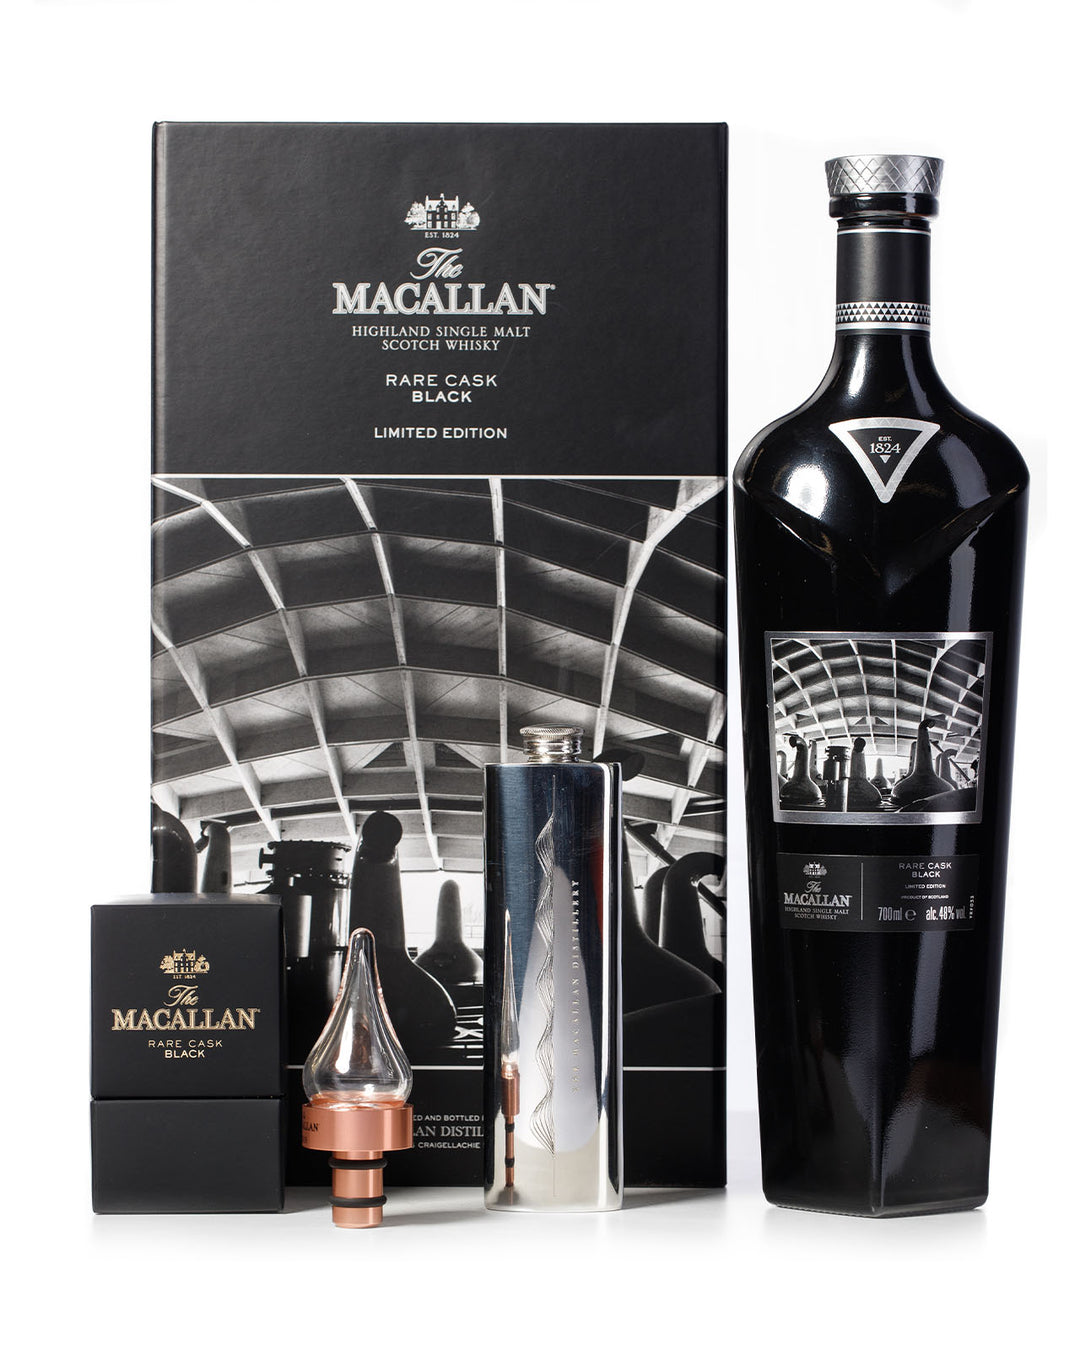 Macallan Rare Cask Black Limited Edition With Pewter Flask, Stopper and Original Box